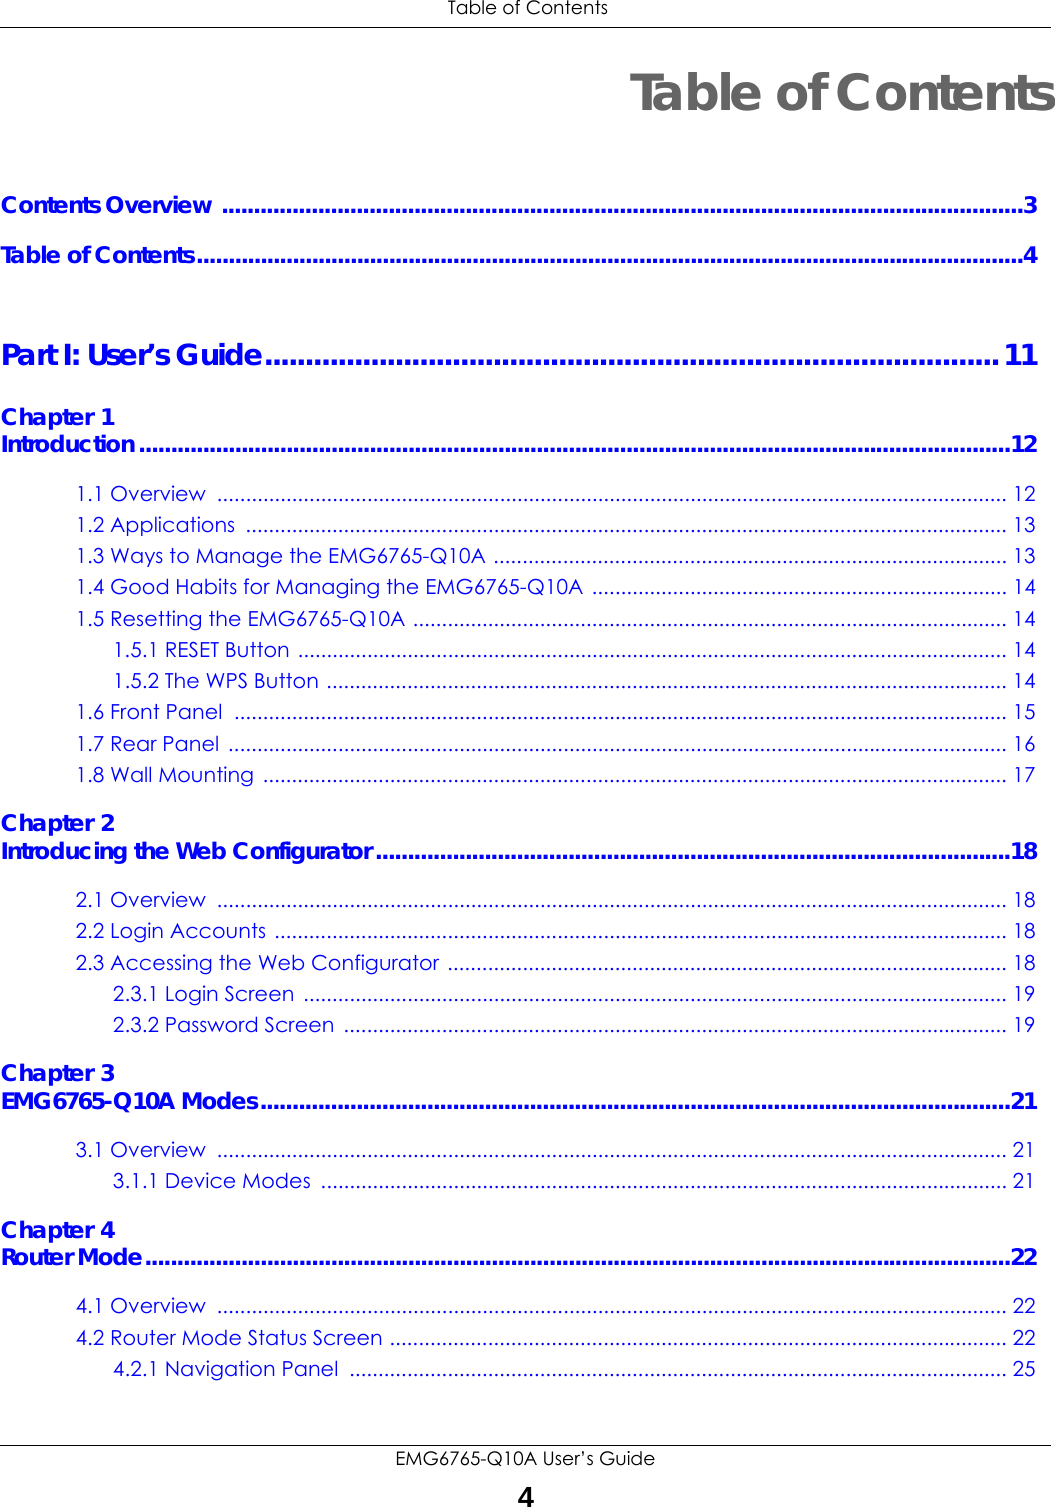 Table of ContentsEMG6765-Q10A User’s Guide4Table of ContentsContents Overview .............................................................................................................................3Table of Contents.................................................................................................................................4Part I: User’s Guide..........................................................................................11Chapter 1Introduction ........................................................................................................................................121.1 Overview  ......................................................................................................................................... 121.2 Applications  .................................................................................................................................... 131.3 Ways to Manage the EMG6765-Q10A ......................................................................................... 131.4 Good Habits for Managing the EMG6765-Q10A ........................................................................ 141.5 Resetting the EMG6765-Q10A ....................................................................................................... 141.5.1 RESET Button ........................................................................................................................... 141.5.2 The WPS Button ...................................................................................................................... 141.6 Front Panel  ...................................................................................................................................... 151.7 Rear Panel  ....................................................................................................................................... 161.8 Wall Mounting ................................................................................................................................. 17Chapter 2Introducing the Web Configurator ...................................................................................................182.1 Overview  ......................................................................................................................................... 182.2 Login Accounts ............................................................................................................................... 182.3 Accessing the Web Configurator ................................................................................................. 182.3.1 Login Screen  .......................................................................................................................... 192.3.2 Password Screen  ................................................................................................................... 19Chapter 3EMG6765-Q10A Modes.....................................................................................................................213.1 Overview  ......................................................................................................................................... 213.1.1 Device Modes  ....................................................................................................................... 21Chapter 4Router Mode.......................................................................................................................................224.1 Overview  ......................................................................................................................................... 224.2 Router Mode Status Screen ........................................................................................................... 224.2.1 Navigation Panel  .................................................................................................................. 25